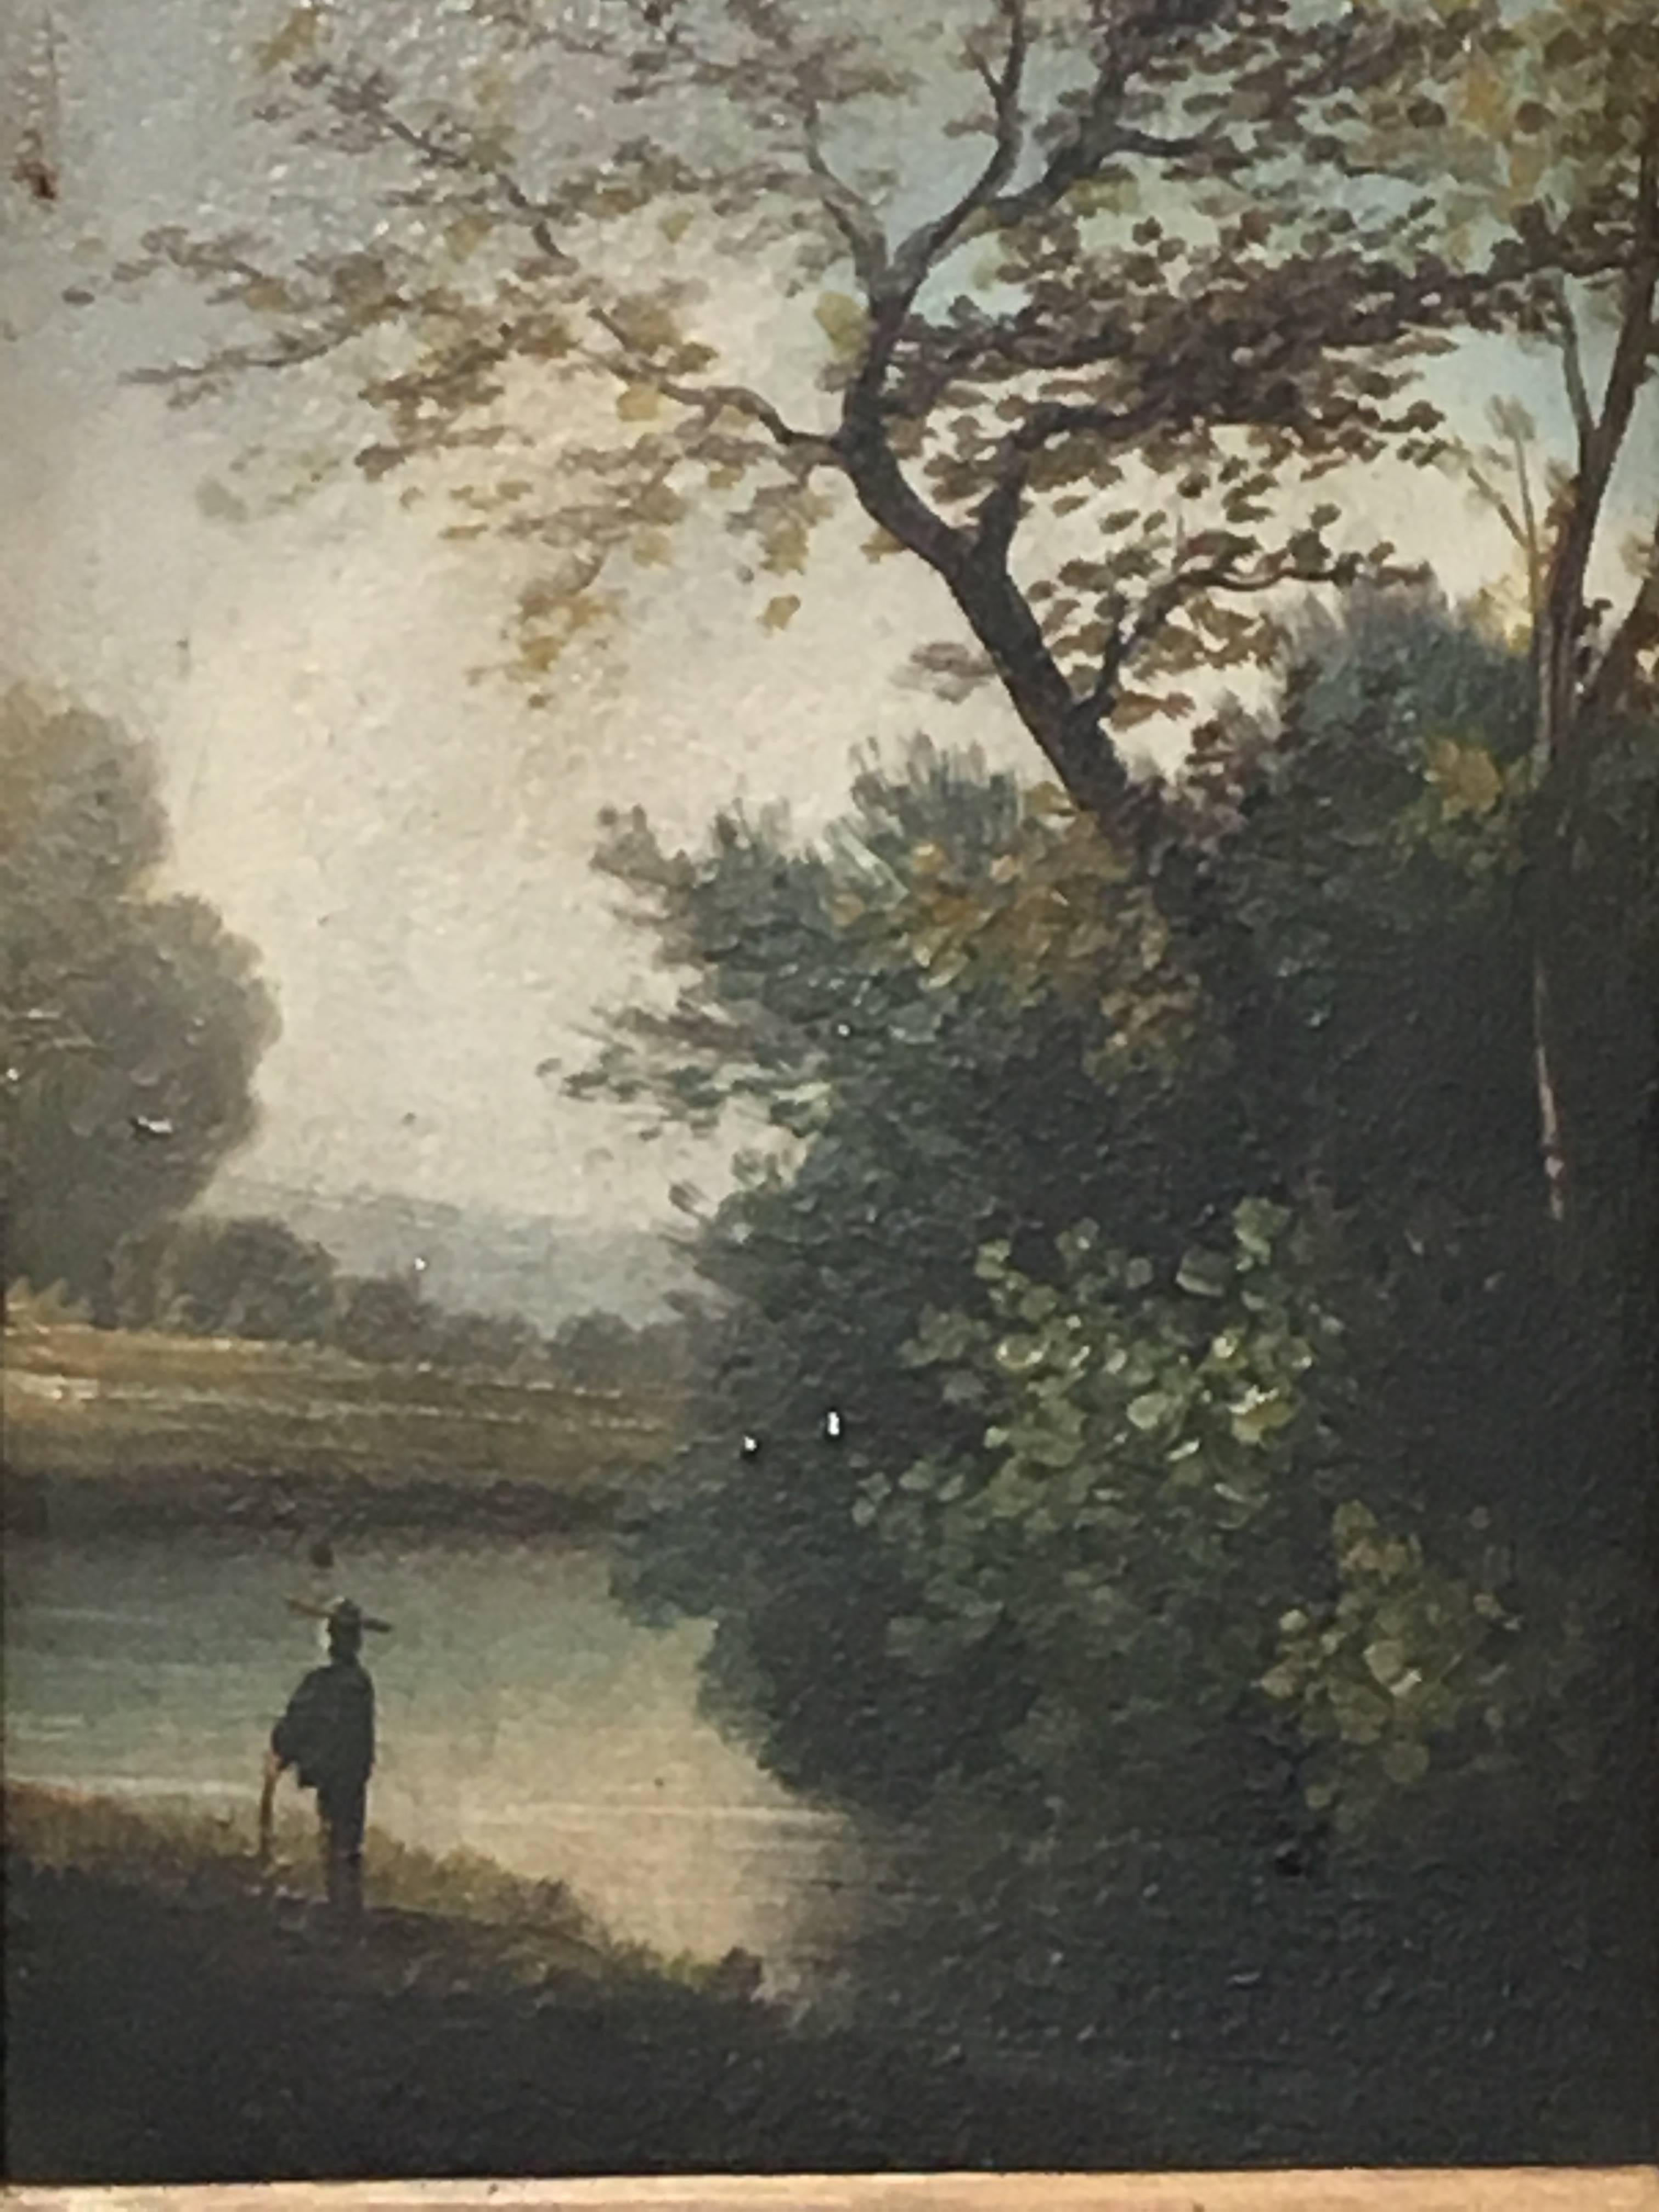 french landscape painters 19th century